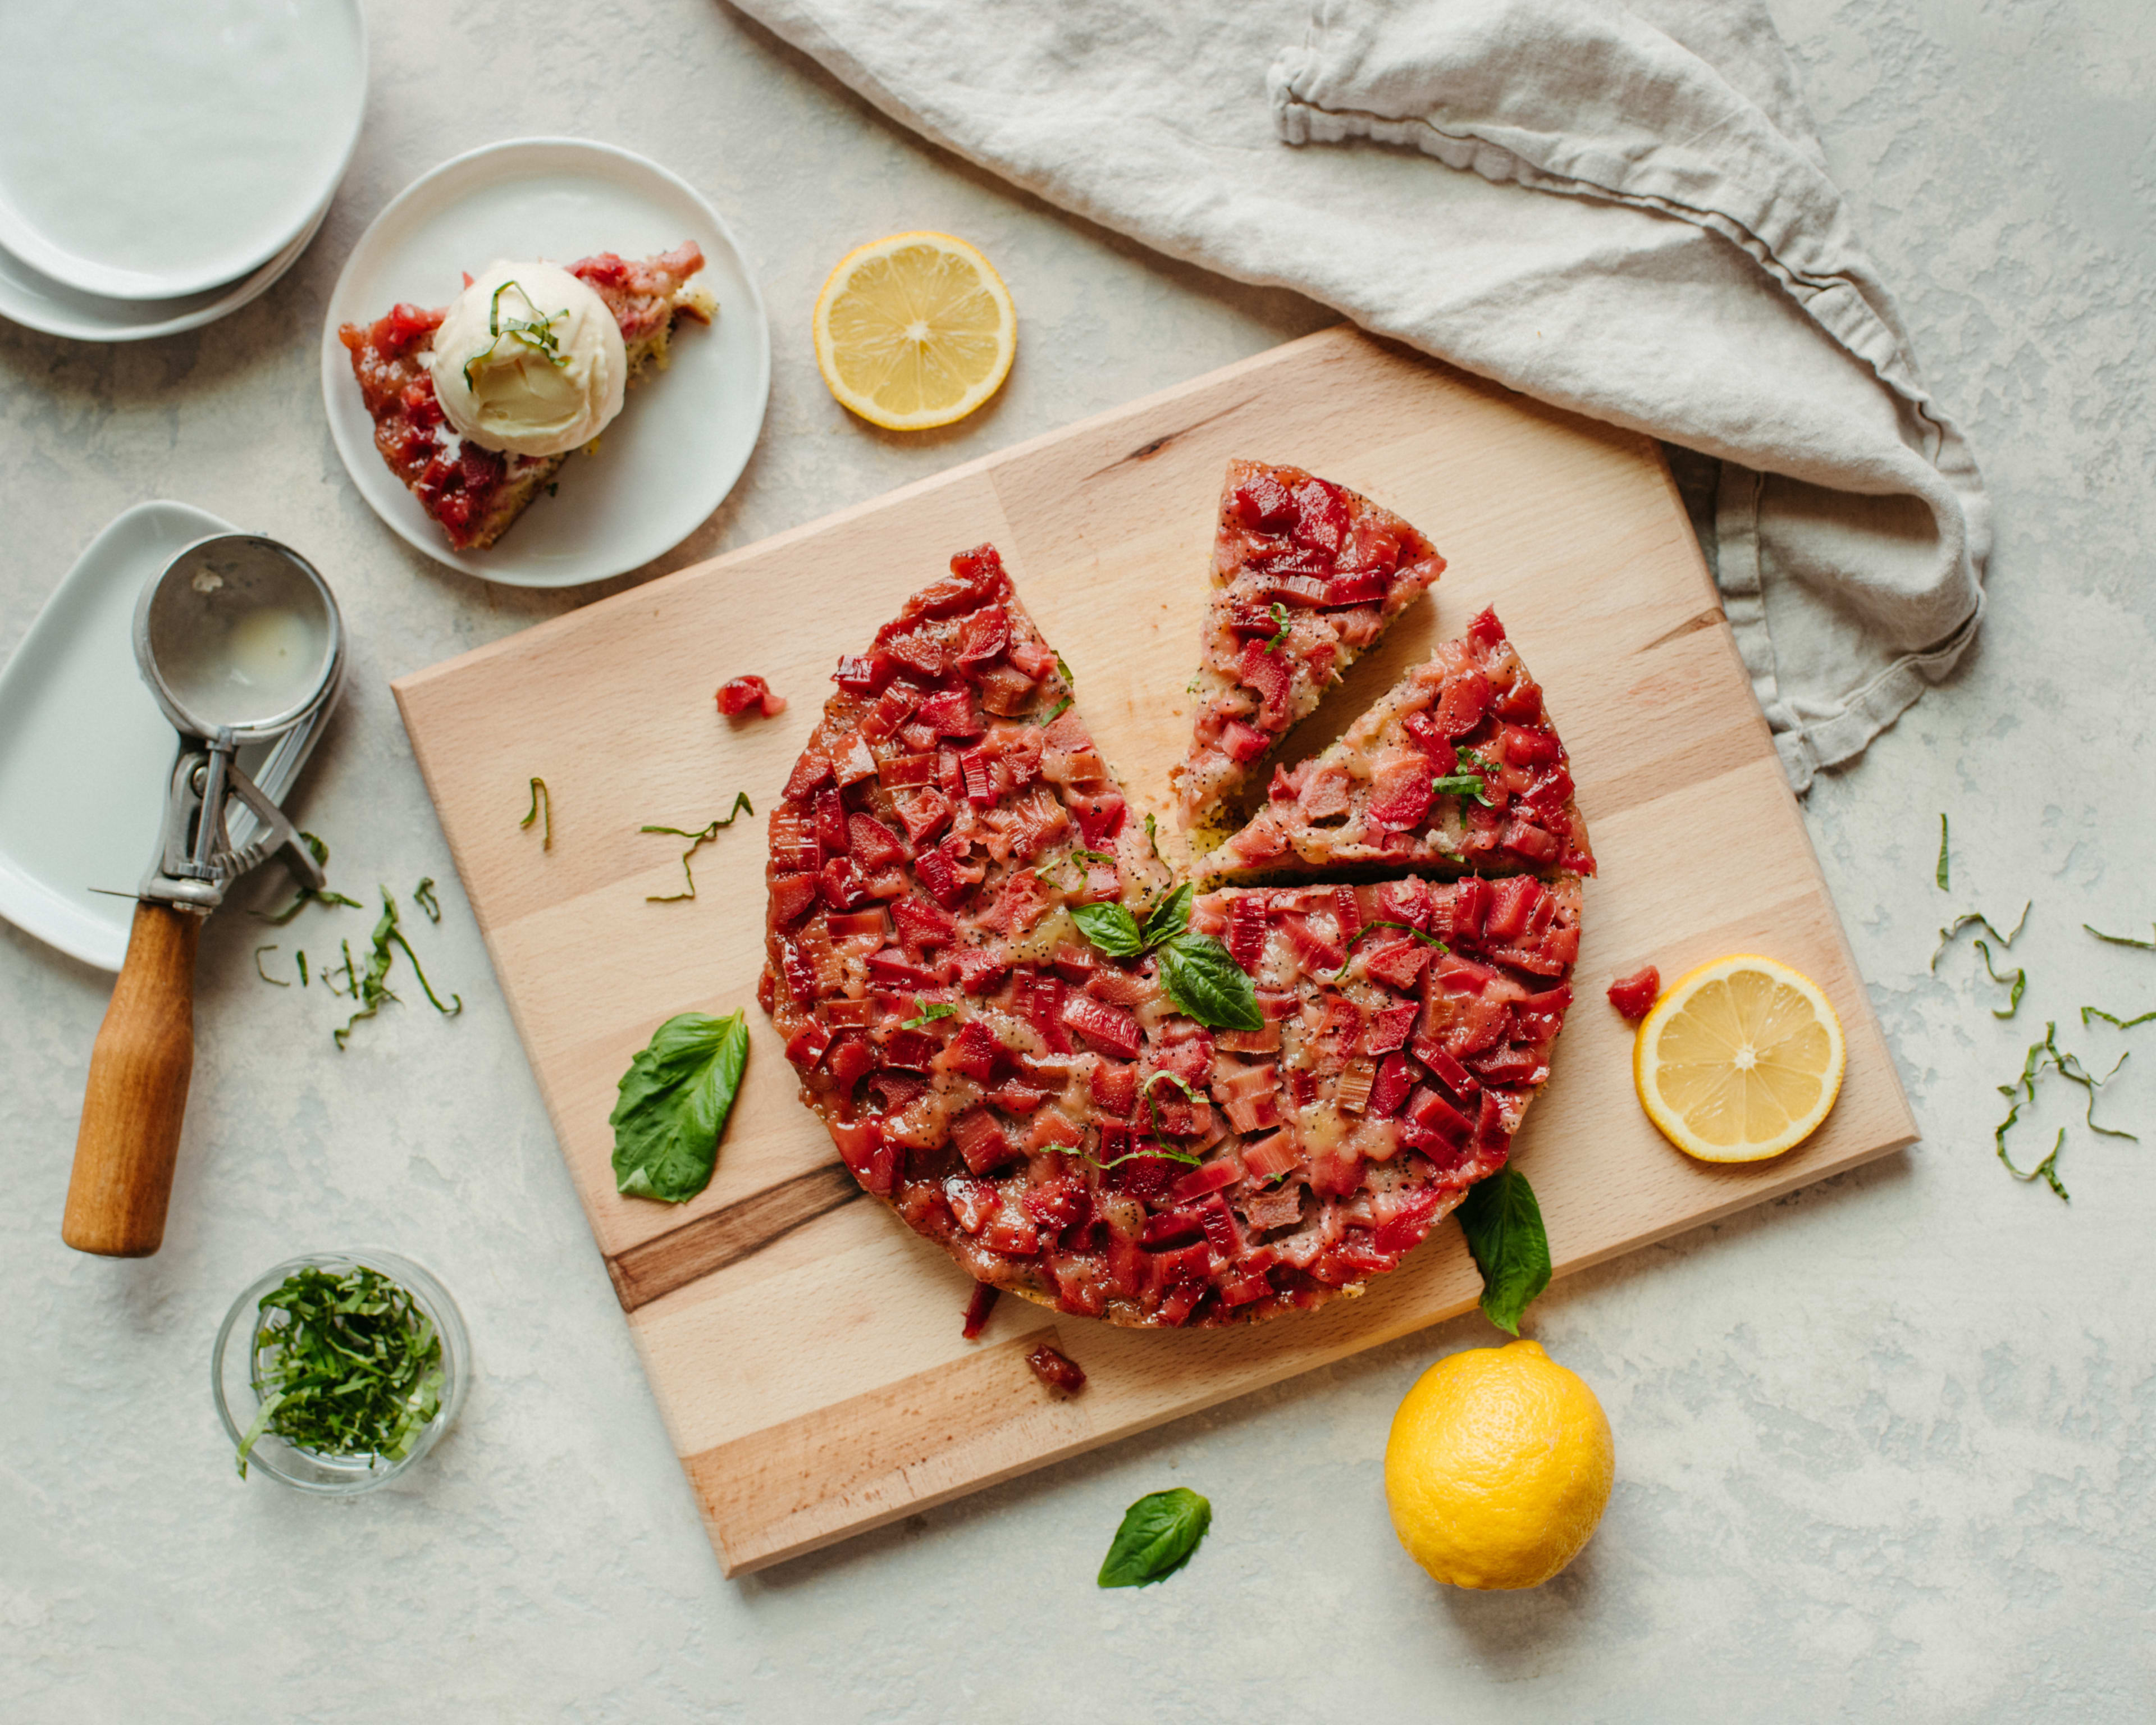 A pizza for a food photo shoot on a cutting board with slices cut out of it.